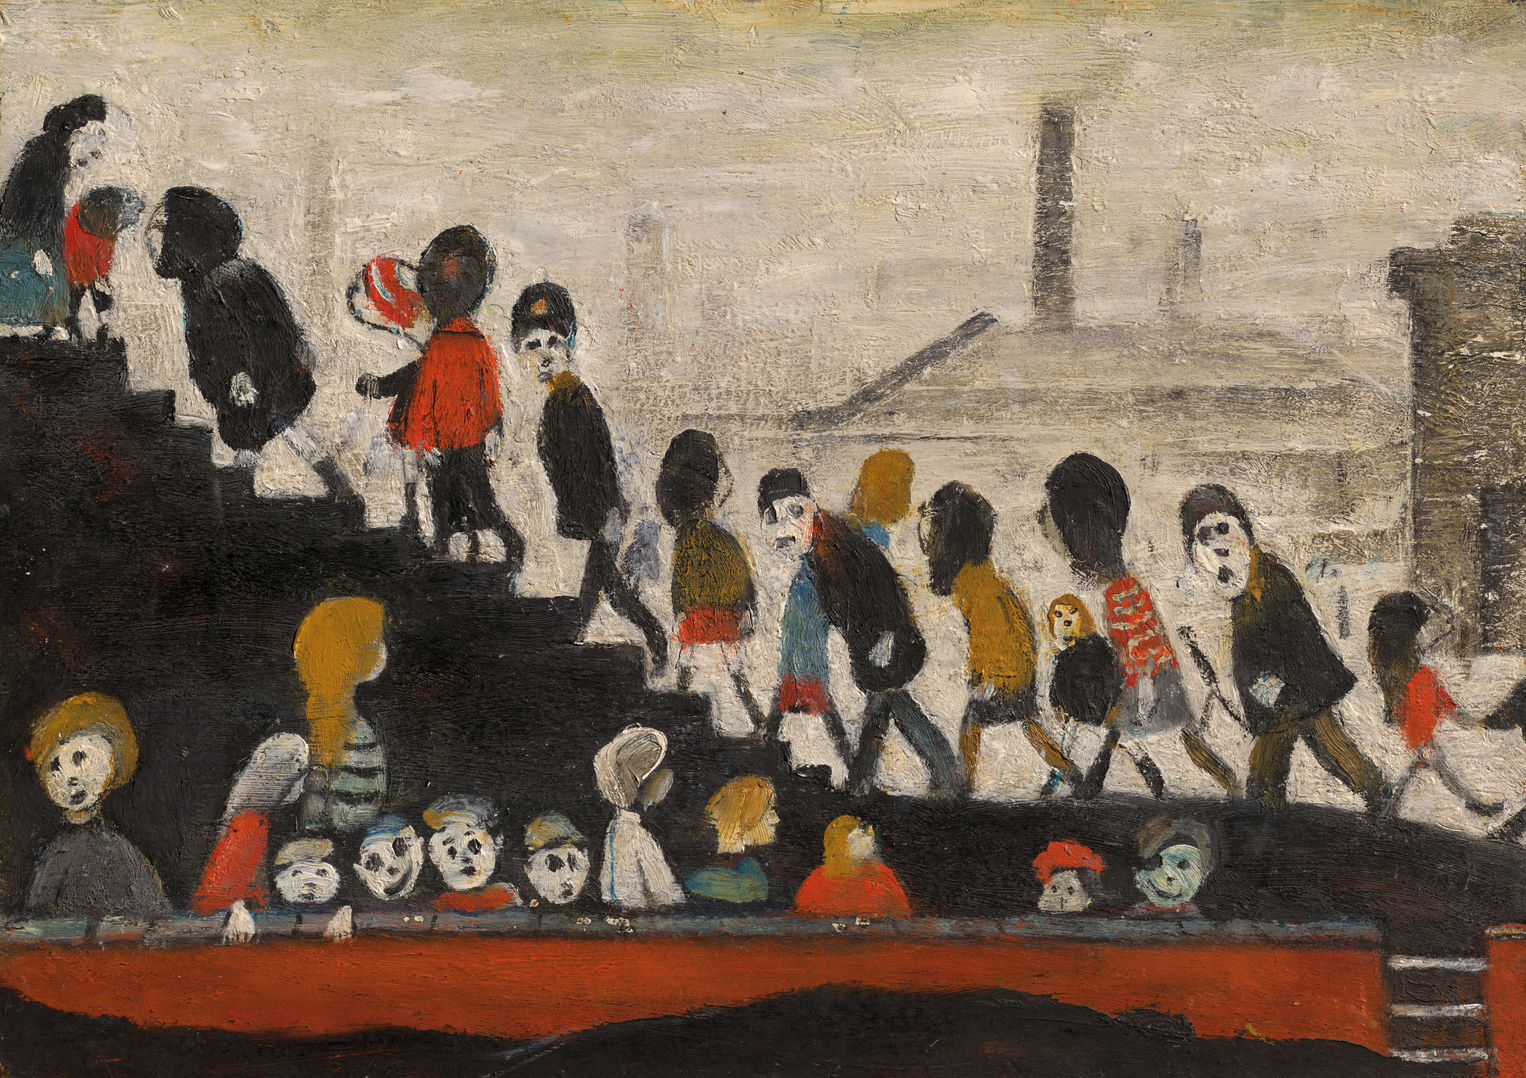 Children Walking up Steps (c1960s) by Laurence Stephen Lowry (1887 - 1976), English artist.